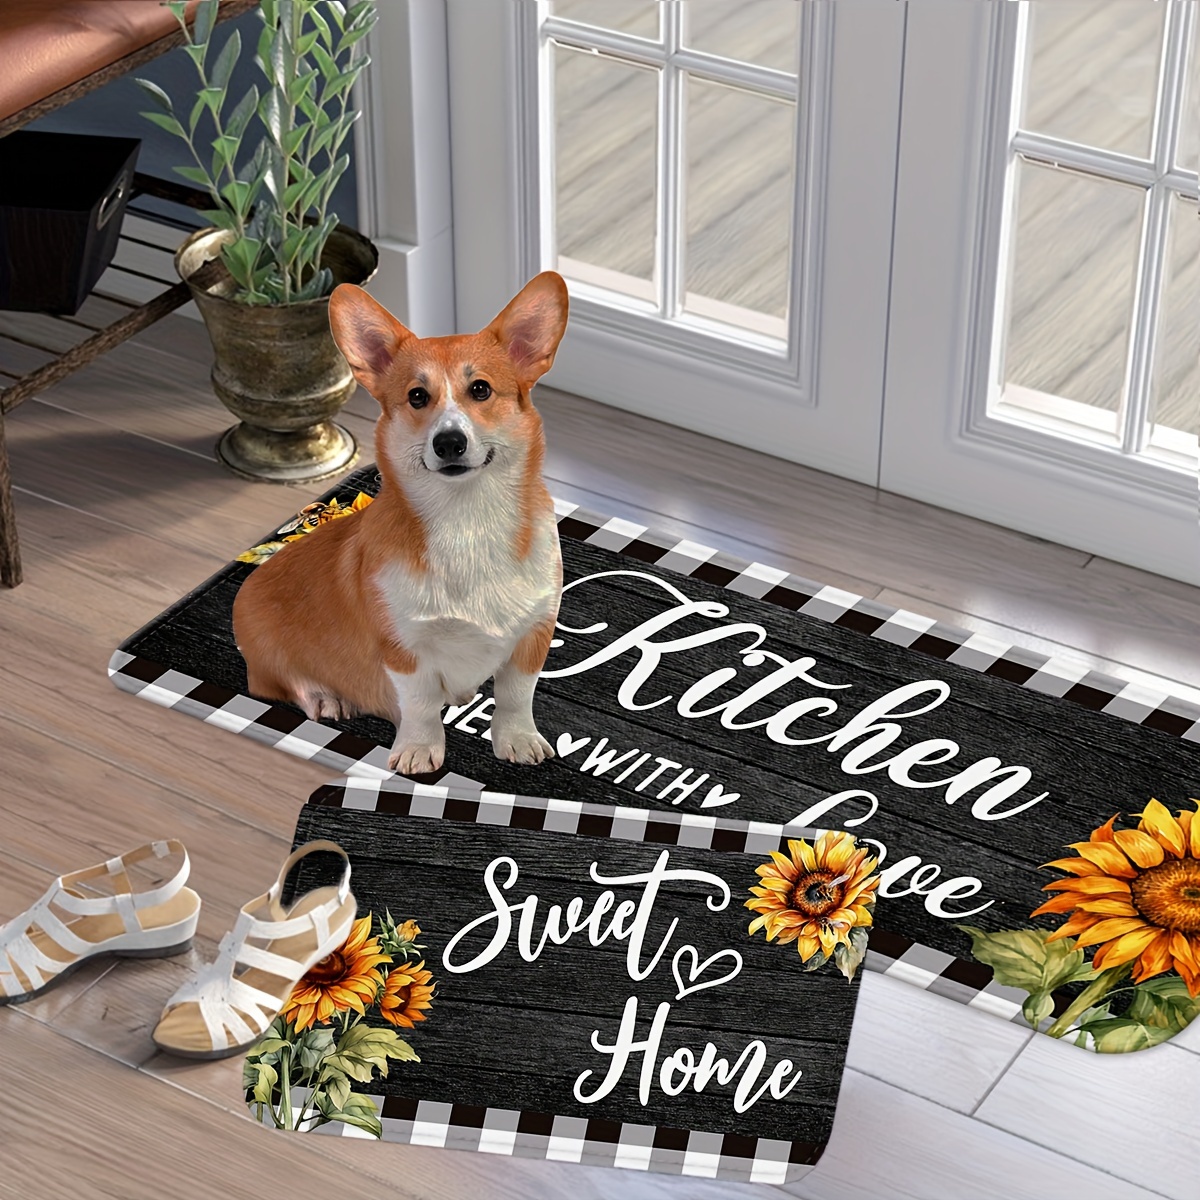 

Sunflower Printed Pattern Kitchen Floor Mats, Non-slip And Durable Bathroom Rug, Soft Comfortable Runner Rugs, Machine Washable Carpets For Kitchen, Home, Bathroom, Spring Decor Rug, Entrance Door Mat